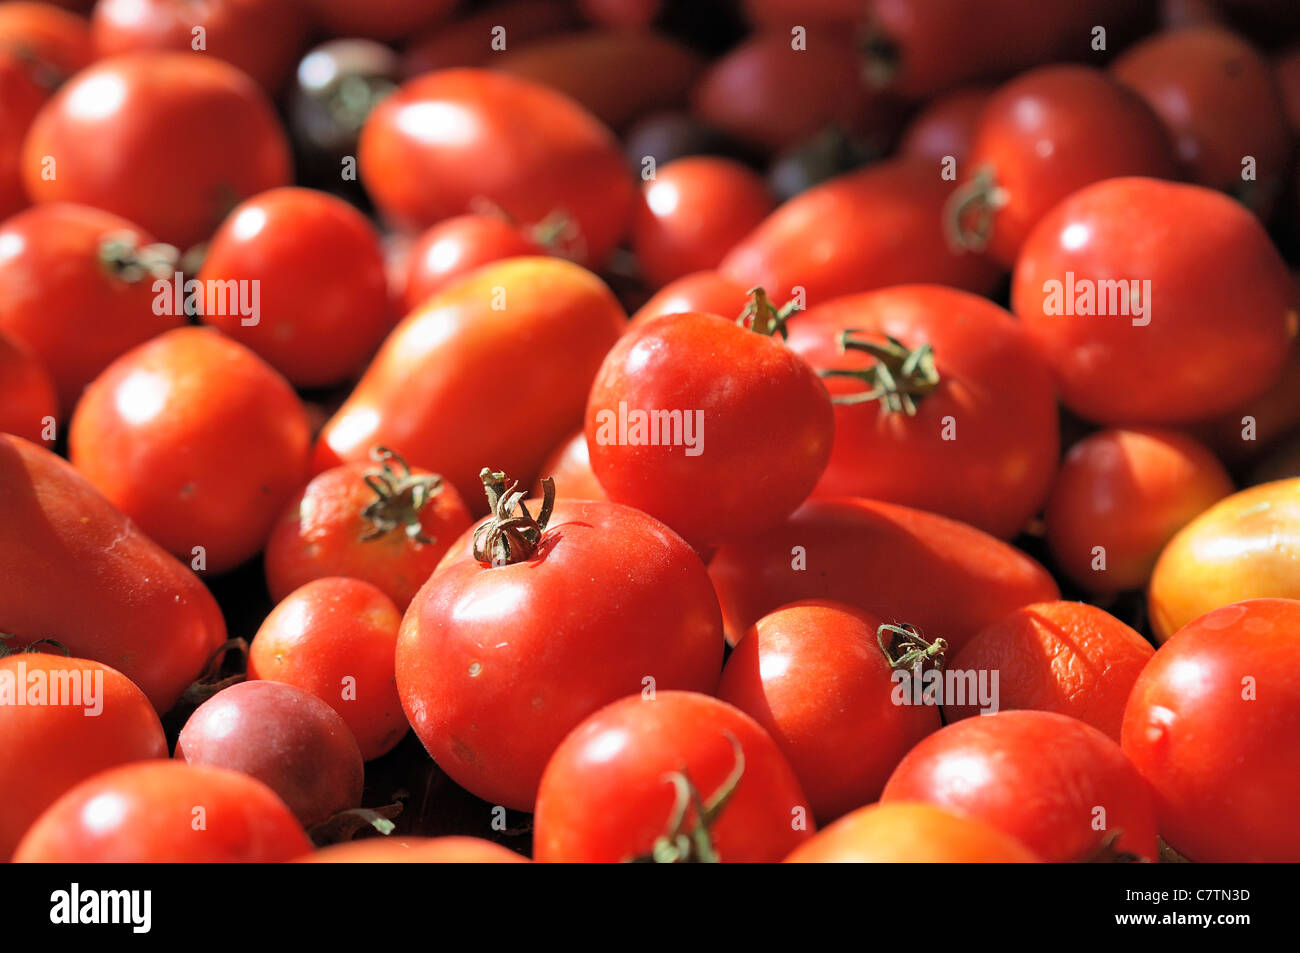 Closeup of ripe tomatoes on a table. Varieties include Roma and Arctic Maxi. Stock Photo